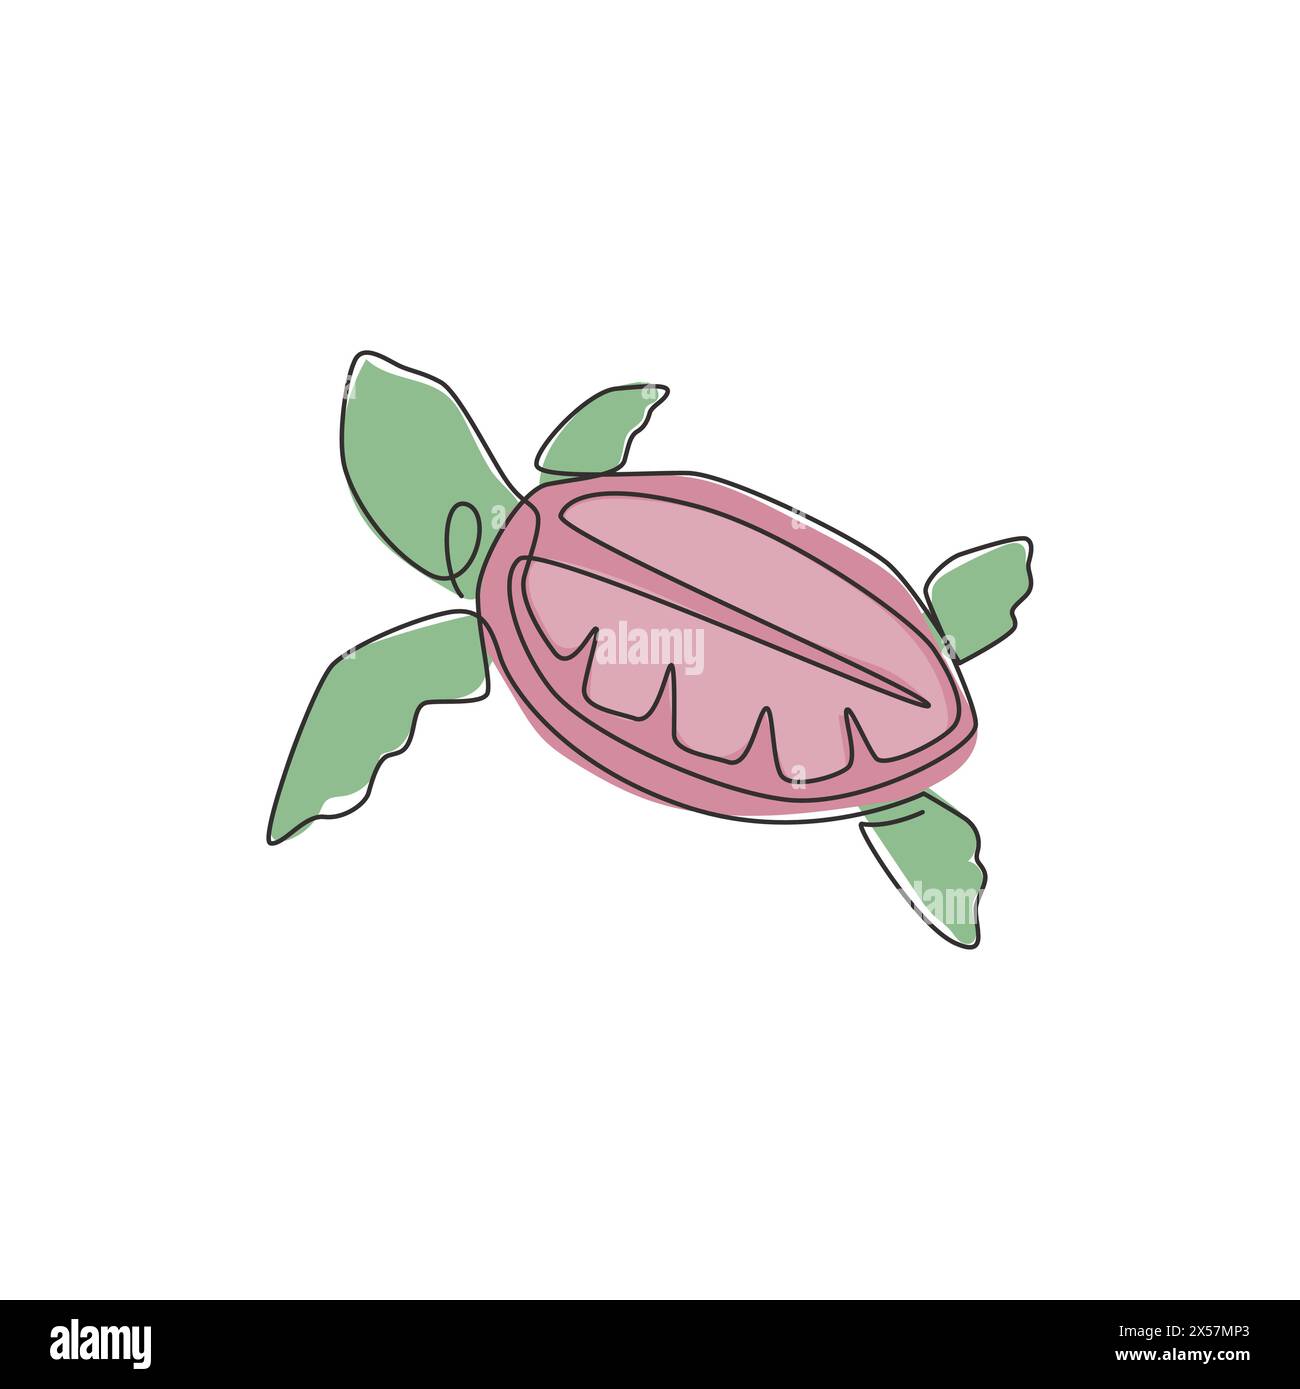 One single line drawing of big turtle for marine company logo identity. Adorable tortoise creature reptile animal mascot concept for conservation foun Stock Vector